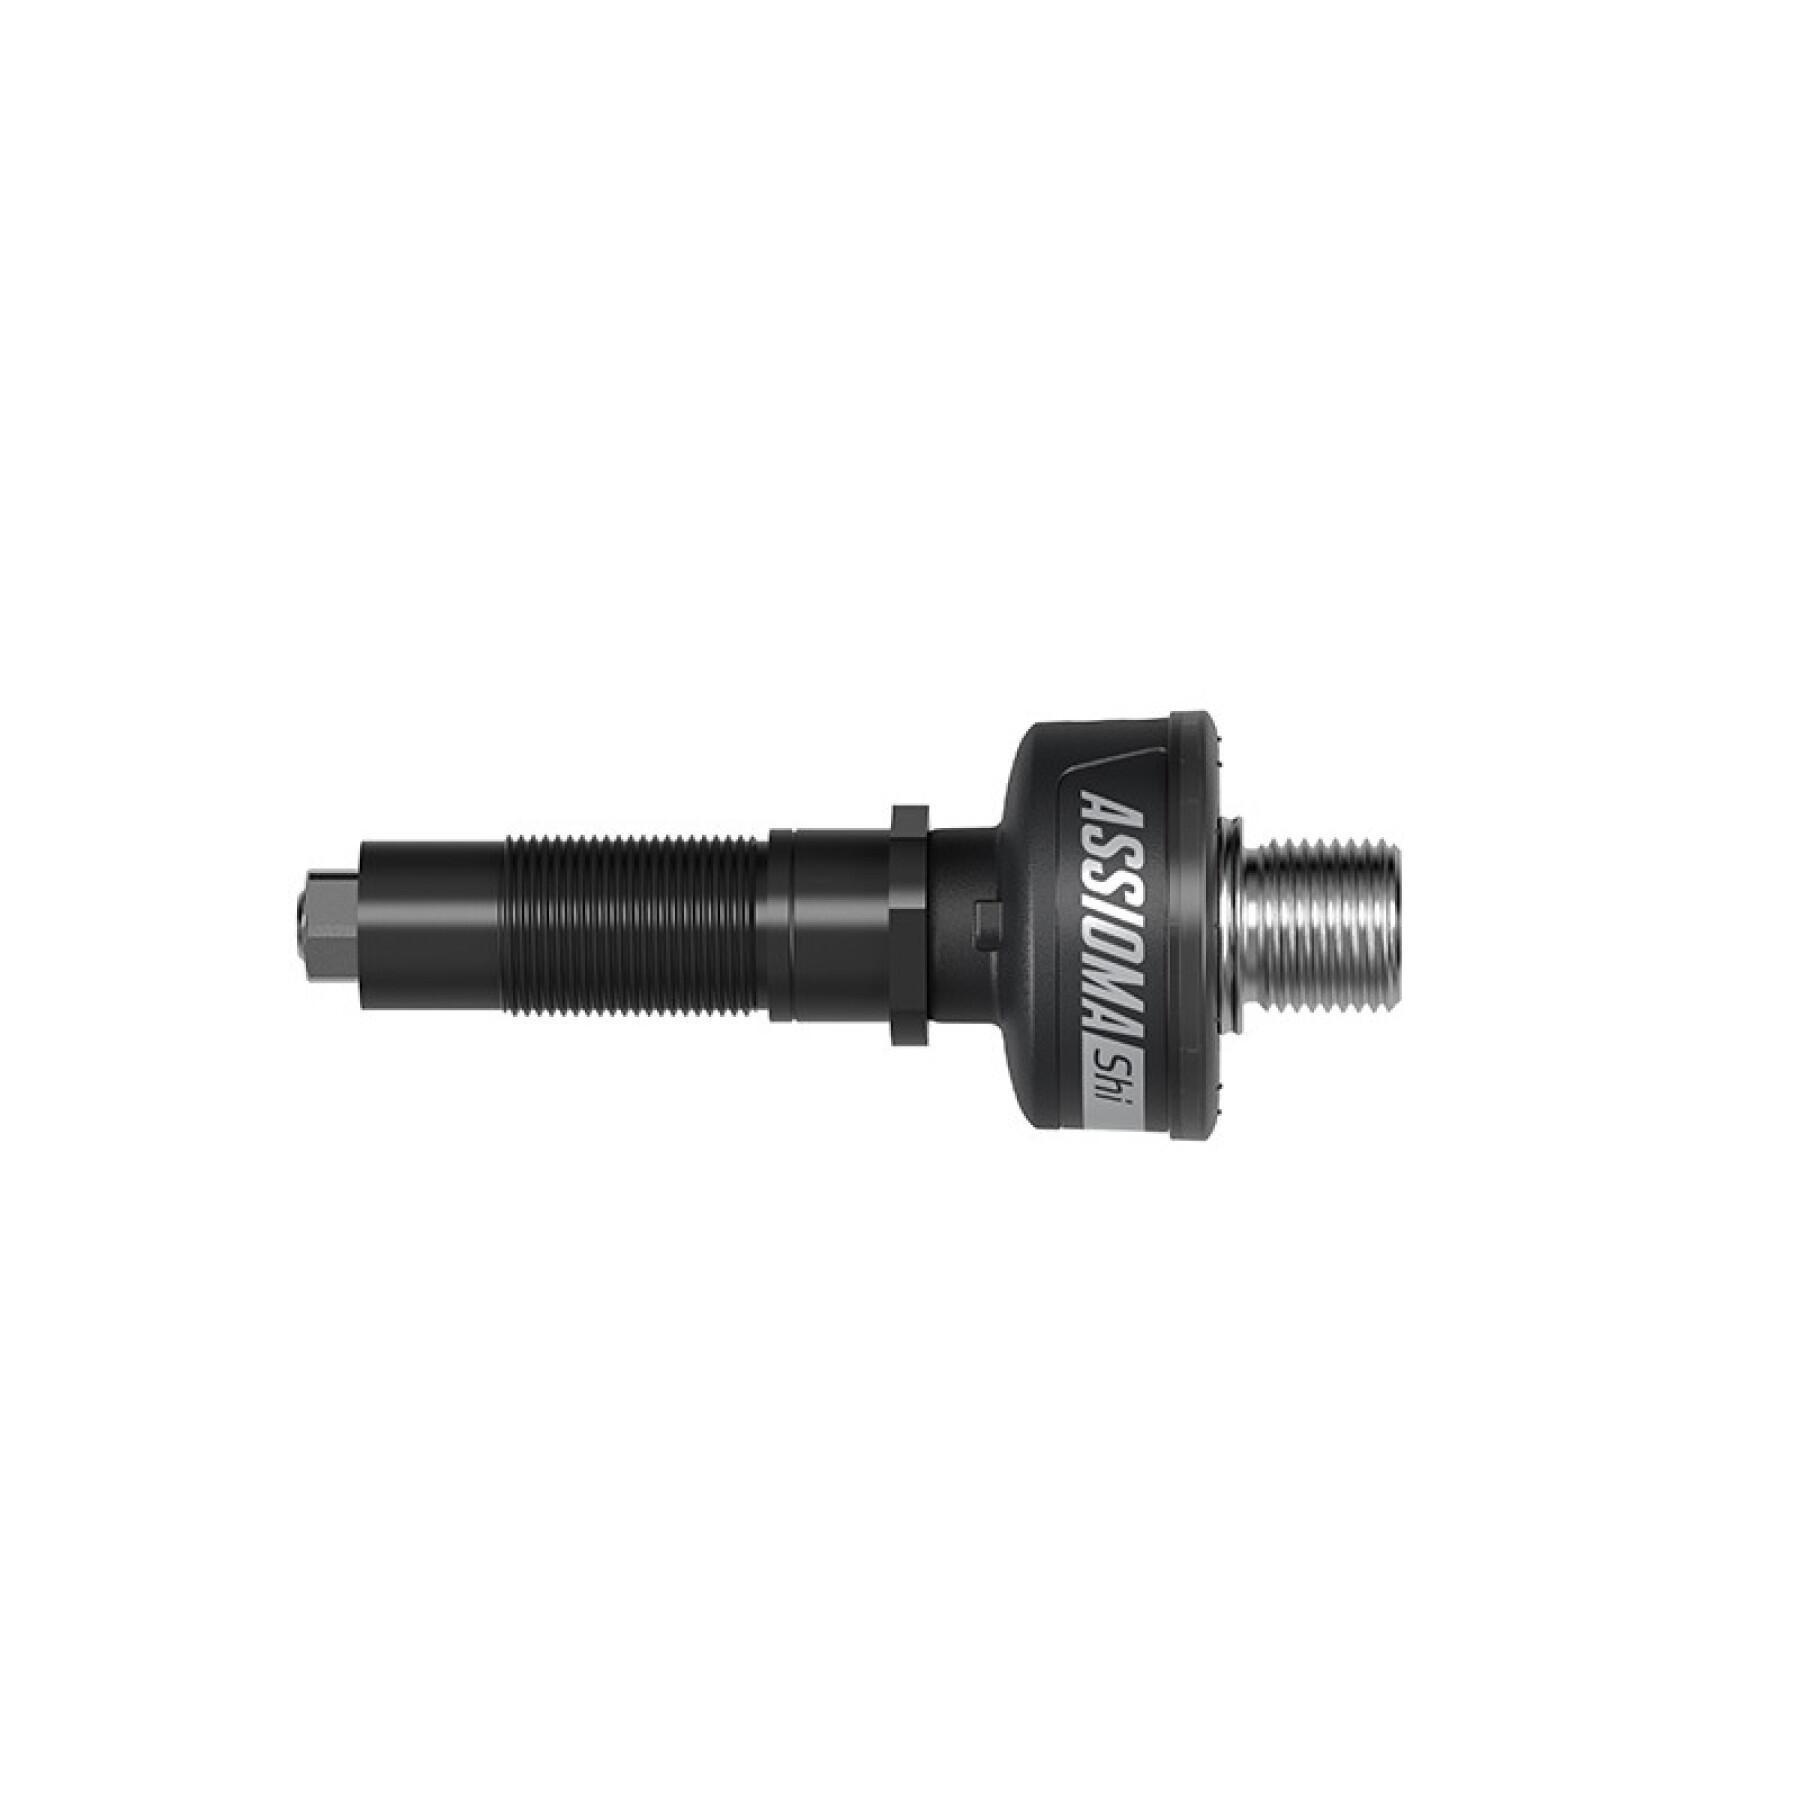 Replacement left sensor with adapter Favero Assioma-Shi